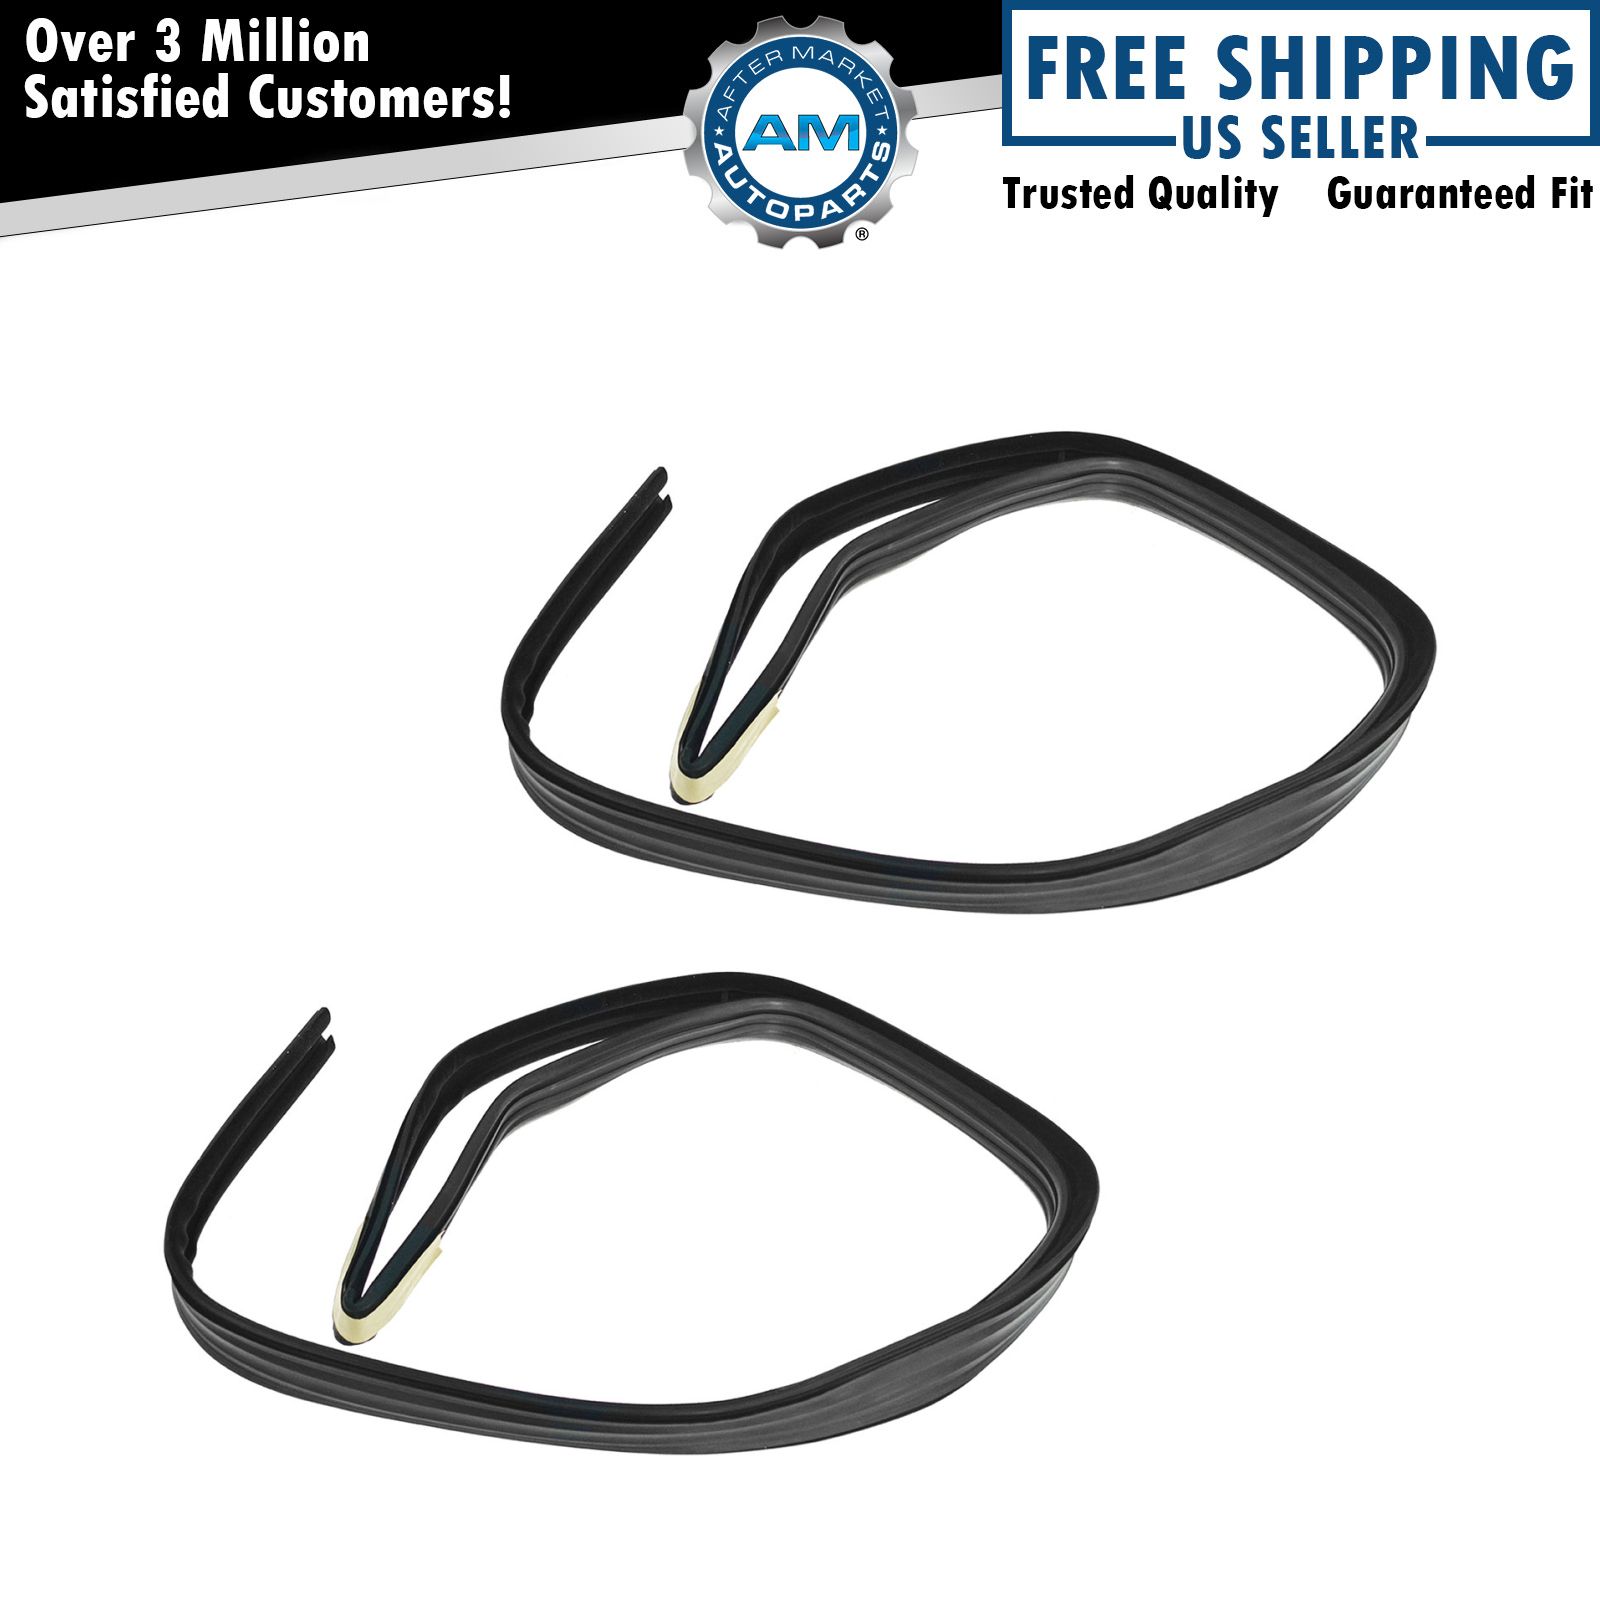 Glass Run Channel Front Door Weatherstrip Seal Pair Set of 2 for Chevy GMC New